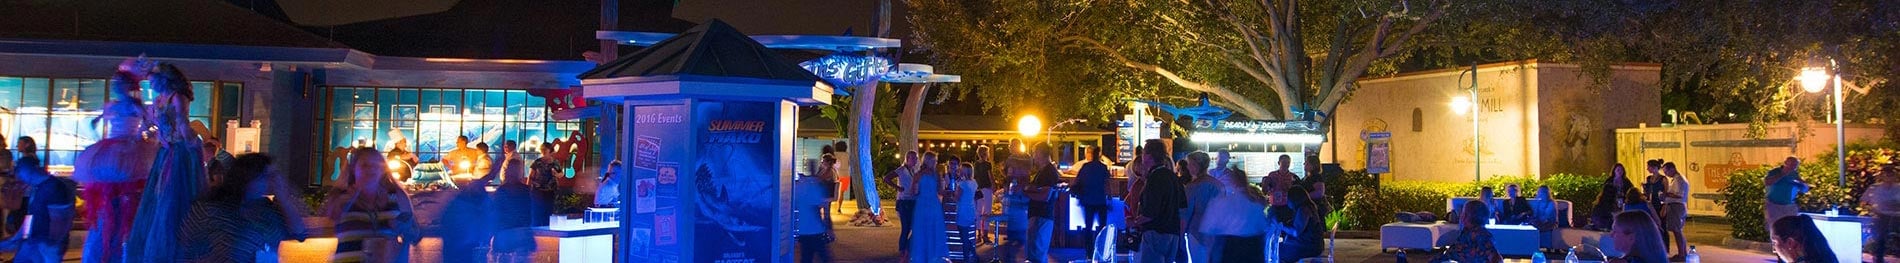 Private group events at SeaWorld Orlando